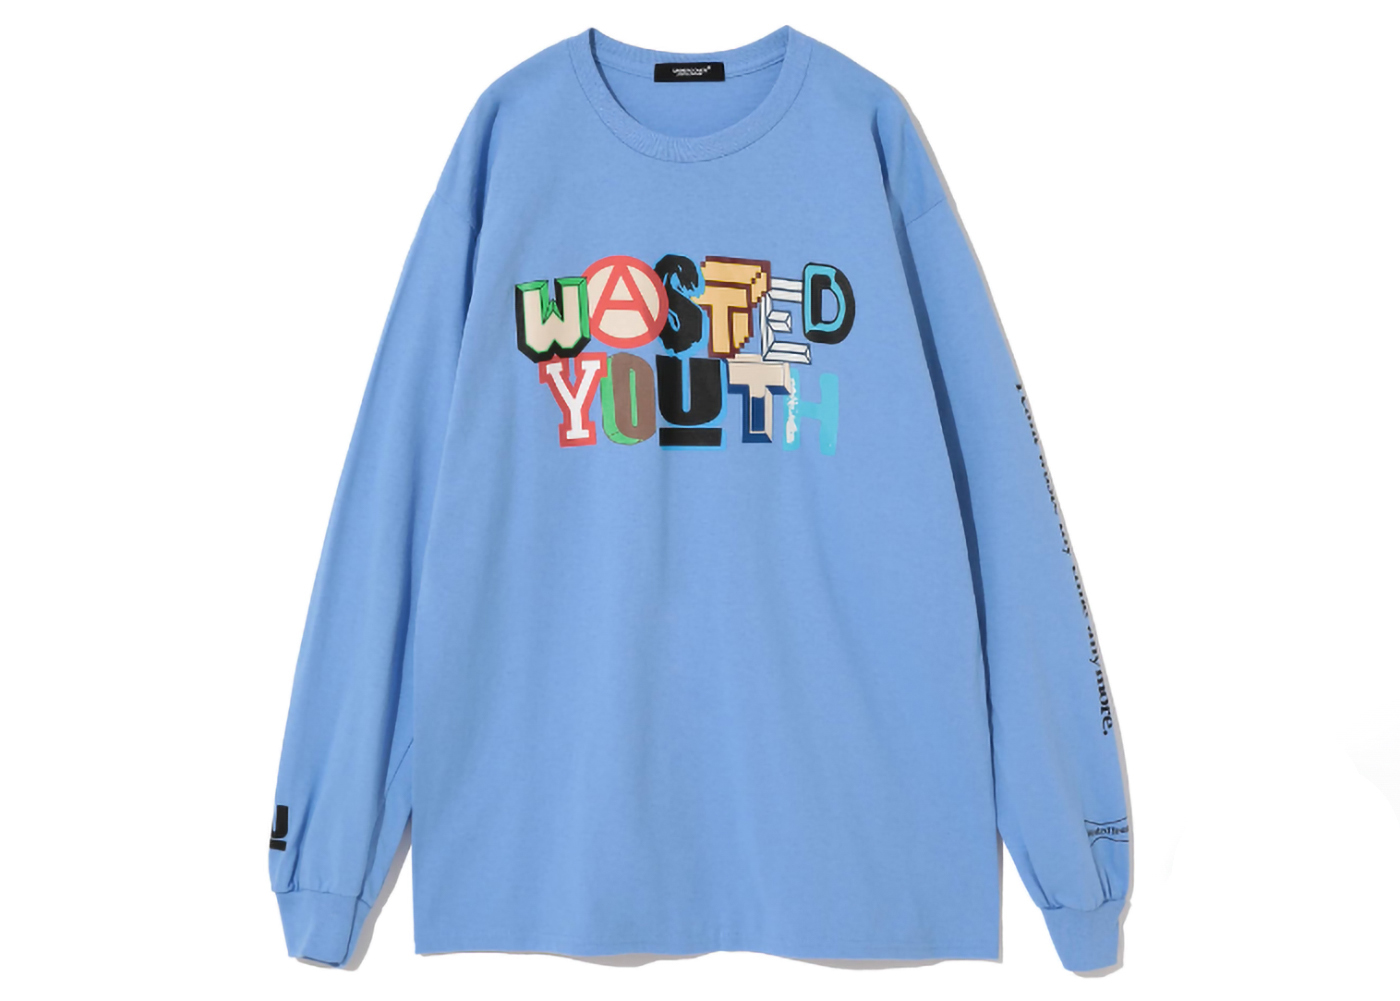 Undercover x Verdy Wasted Youth L/S T-Shirt Light Blue - SS23 